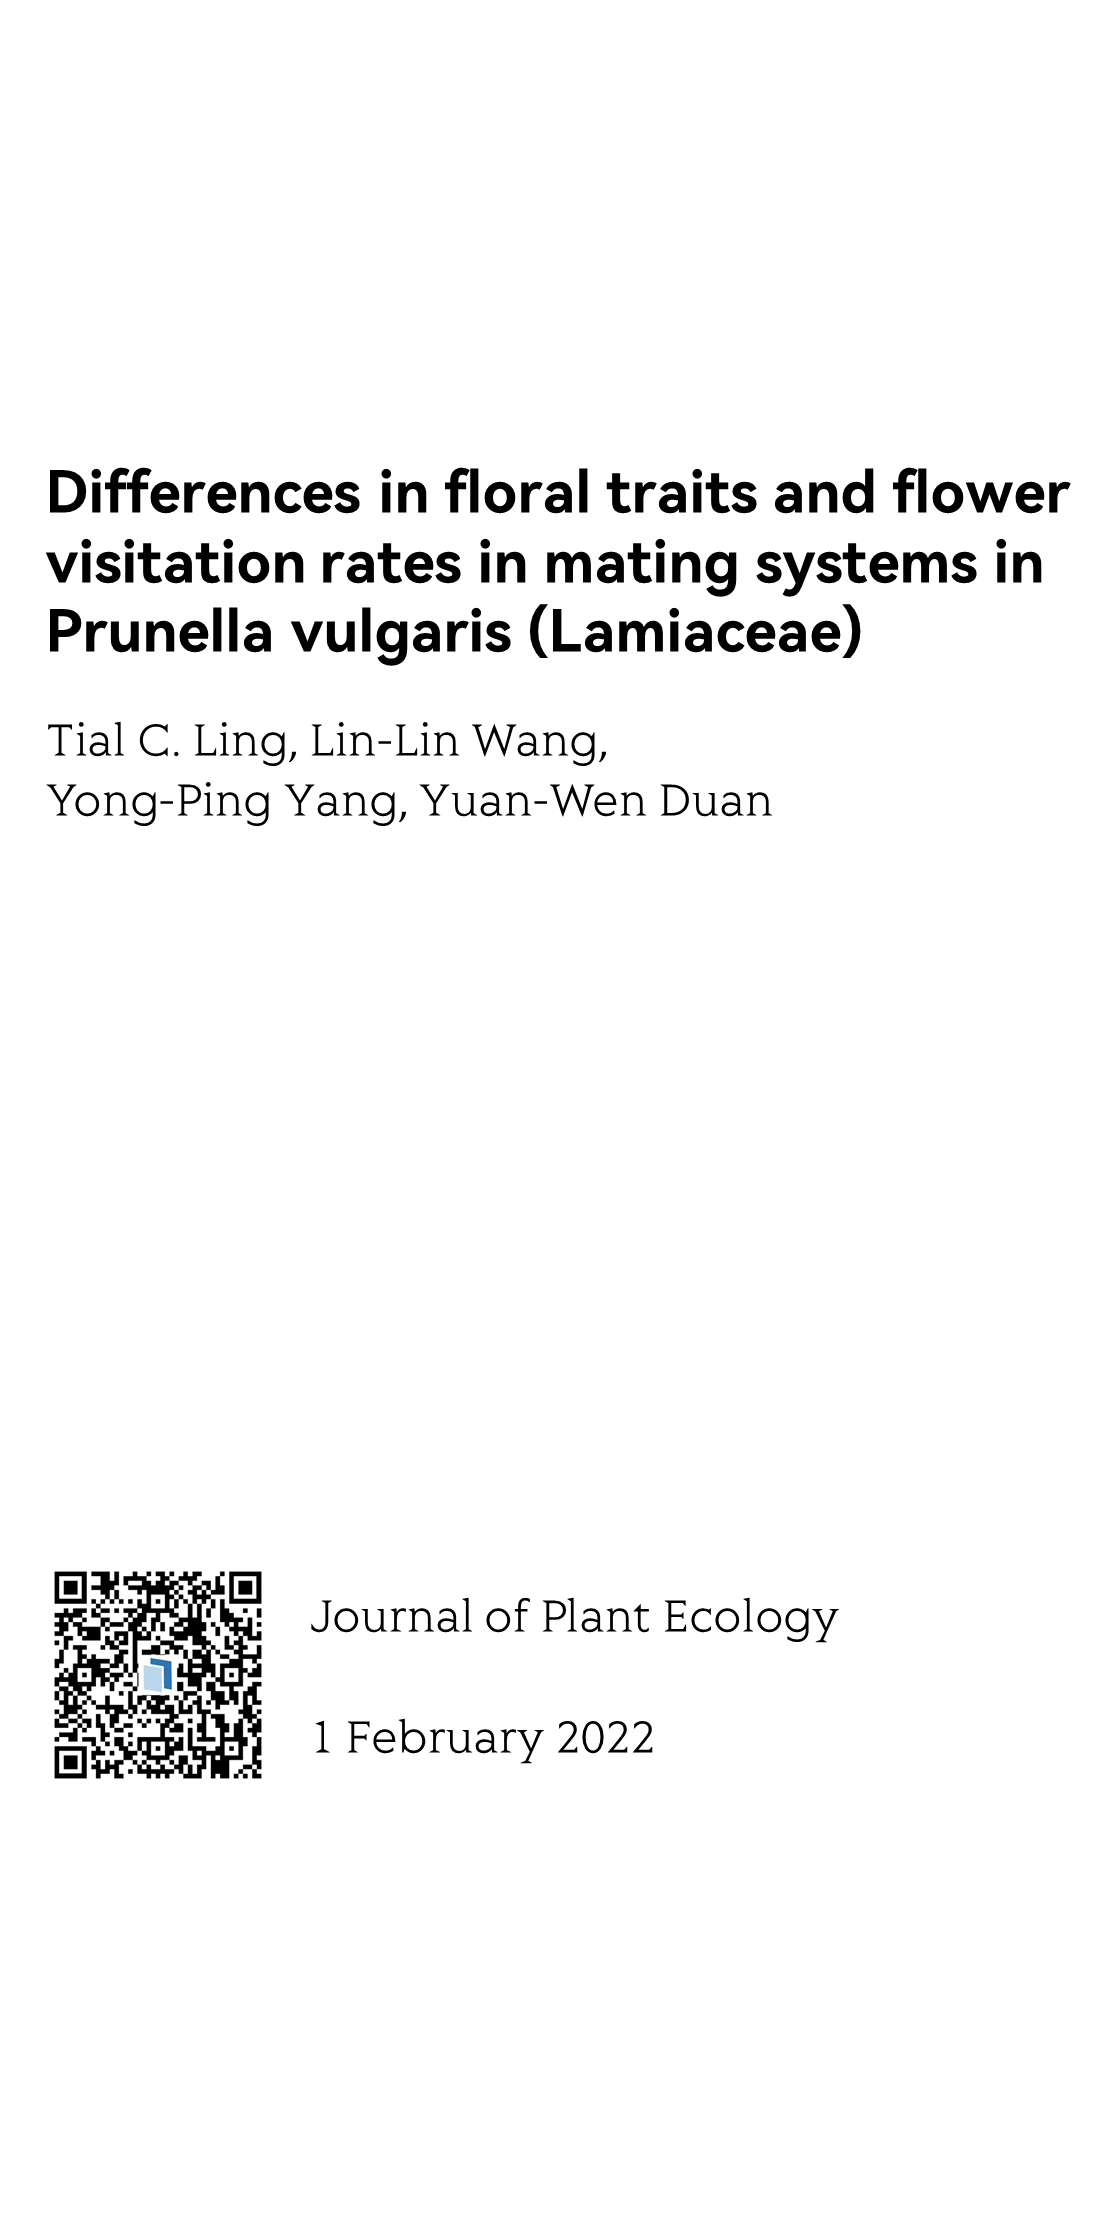 Journal of Plant Ecology_1